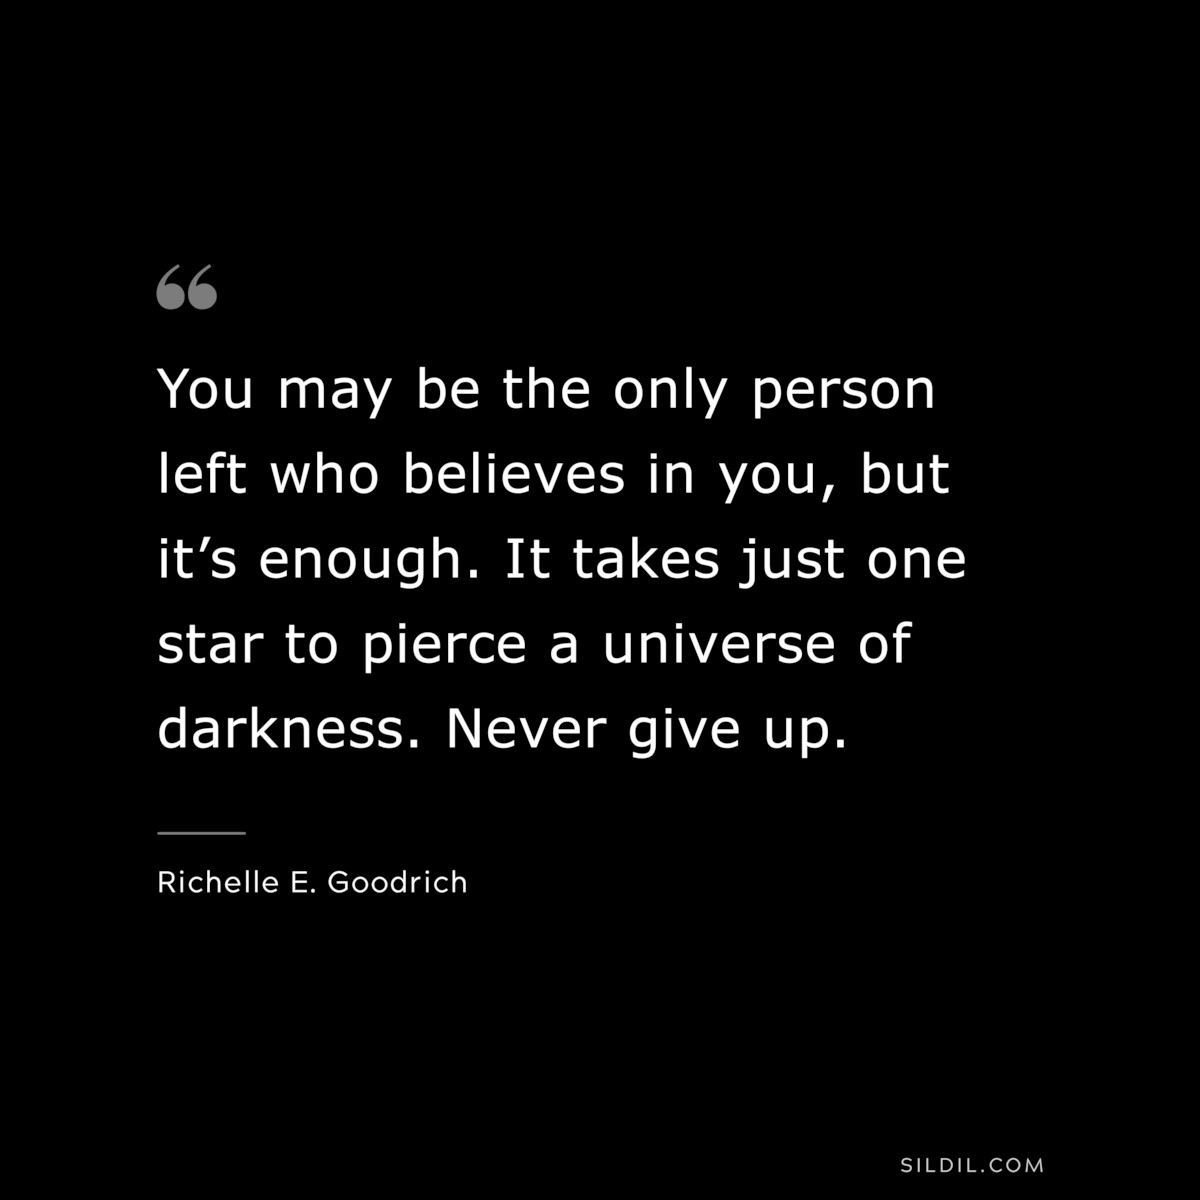 You may be the only person left who believes in you, but it’s enough. It takes just one star to pierce a universe of darkness. Never give up. ― Richelle E. Goodrich